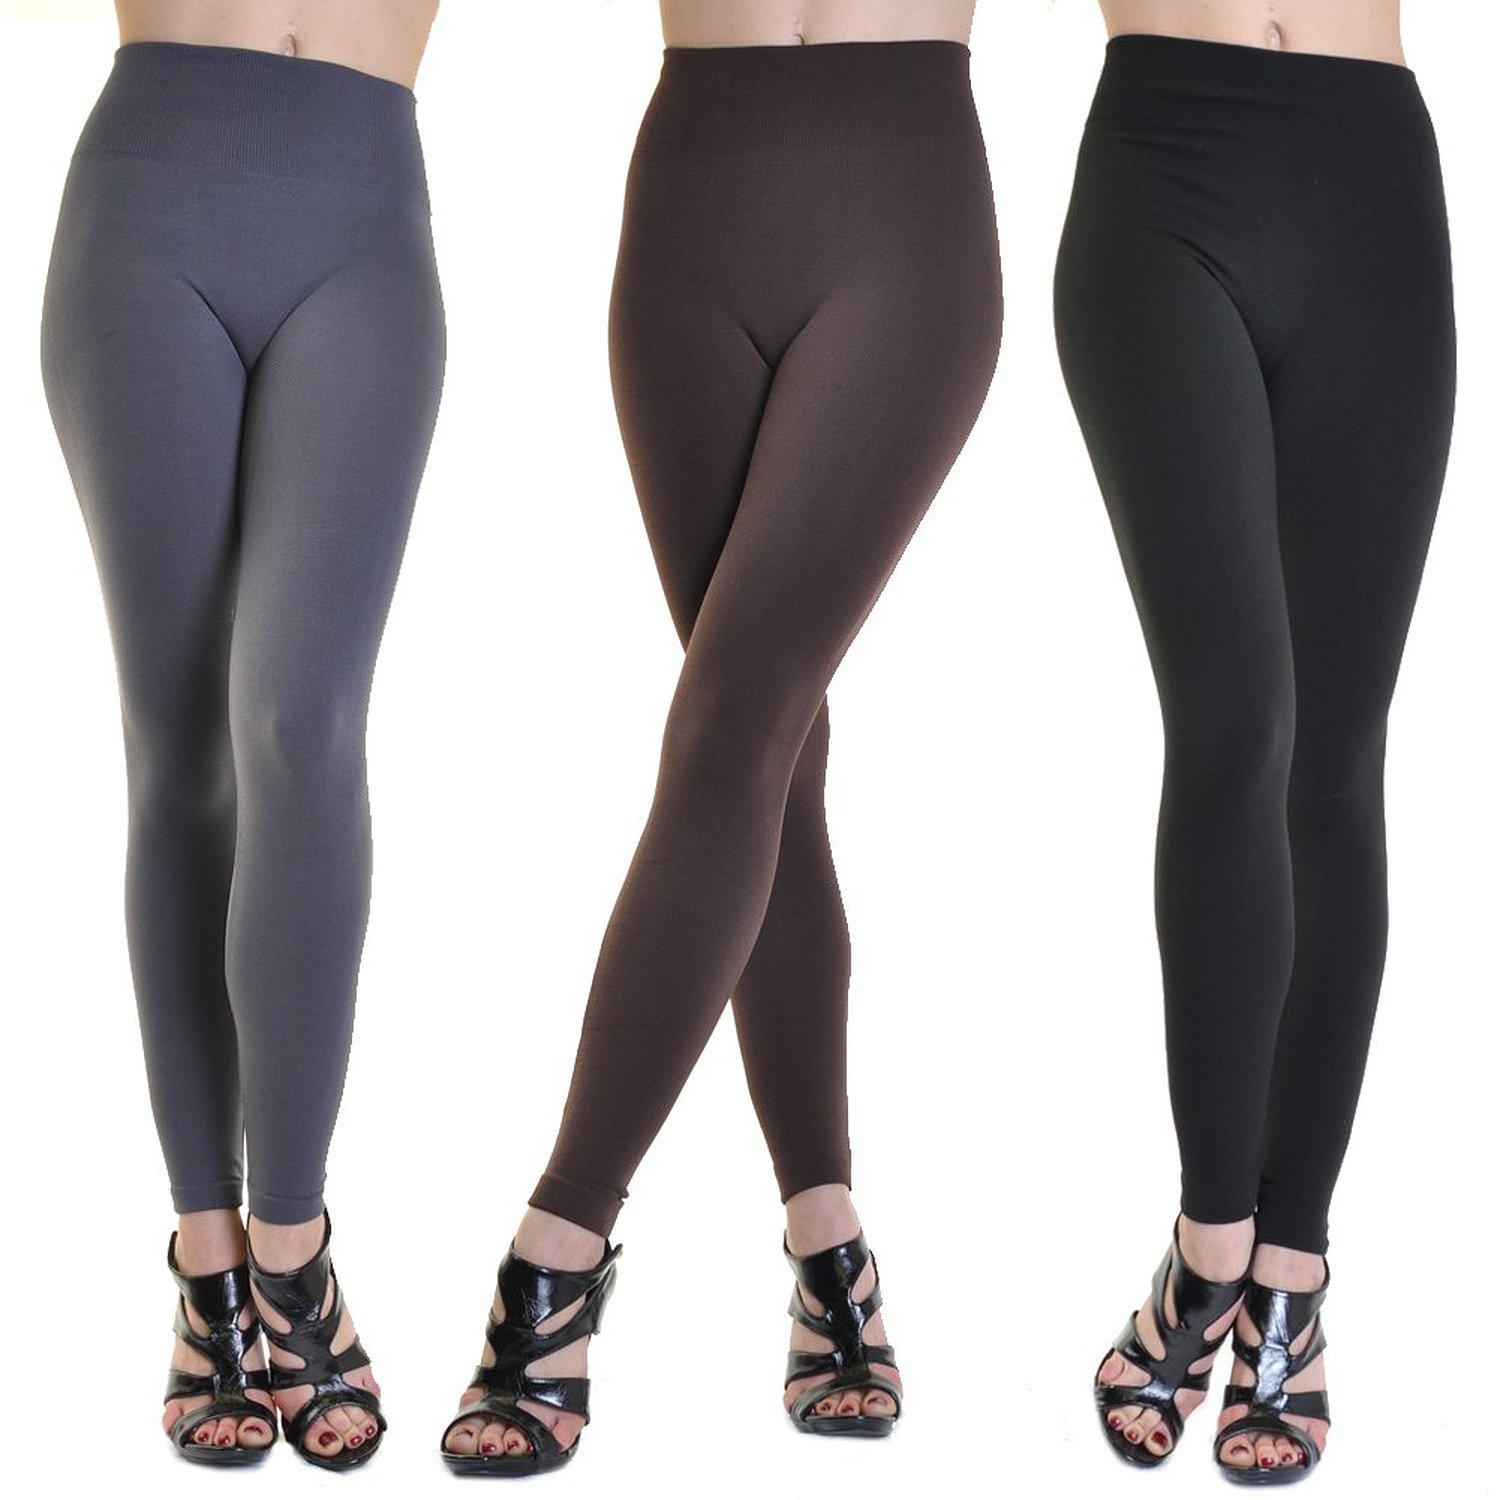 DO YOU KNOW THE DIFFERENCE BETWEEN LEGGINGS AND TIGHTS?